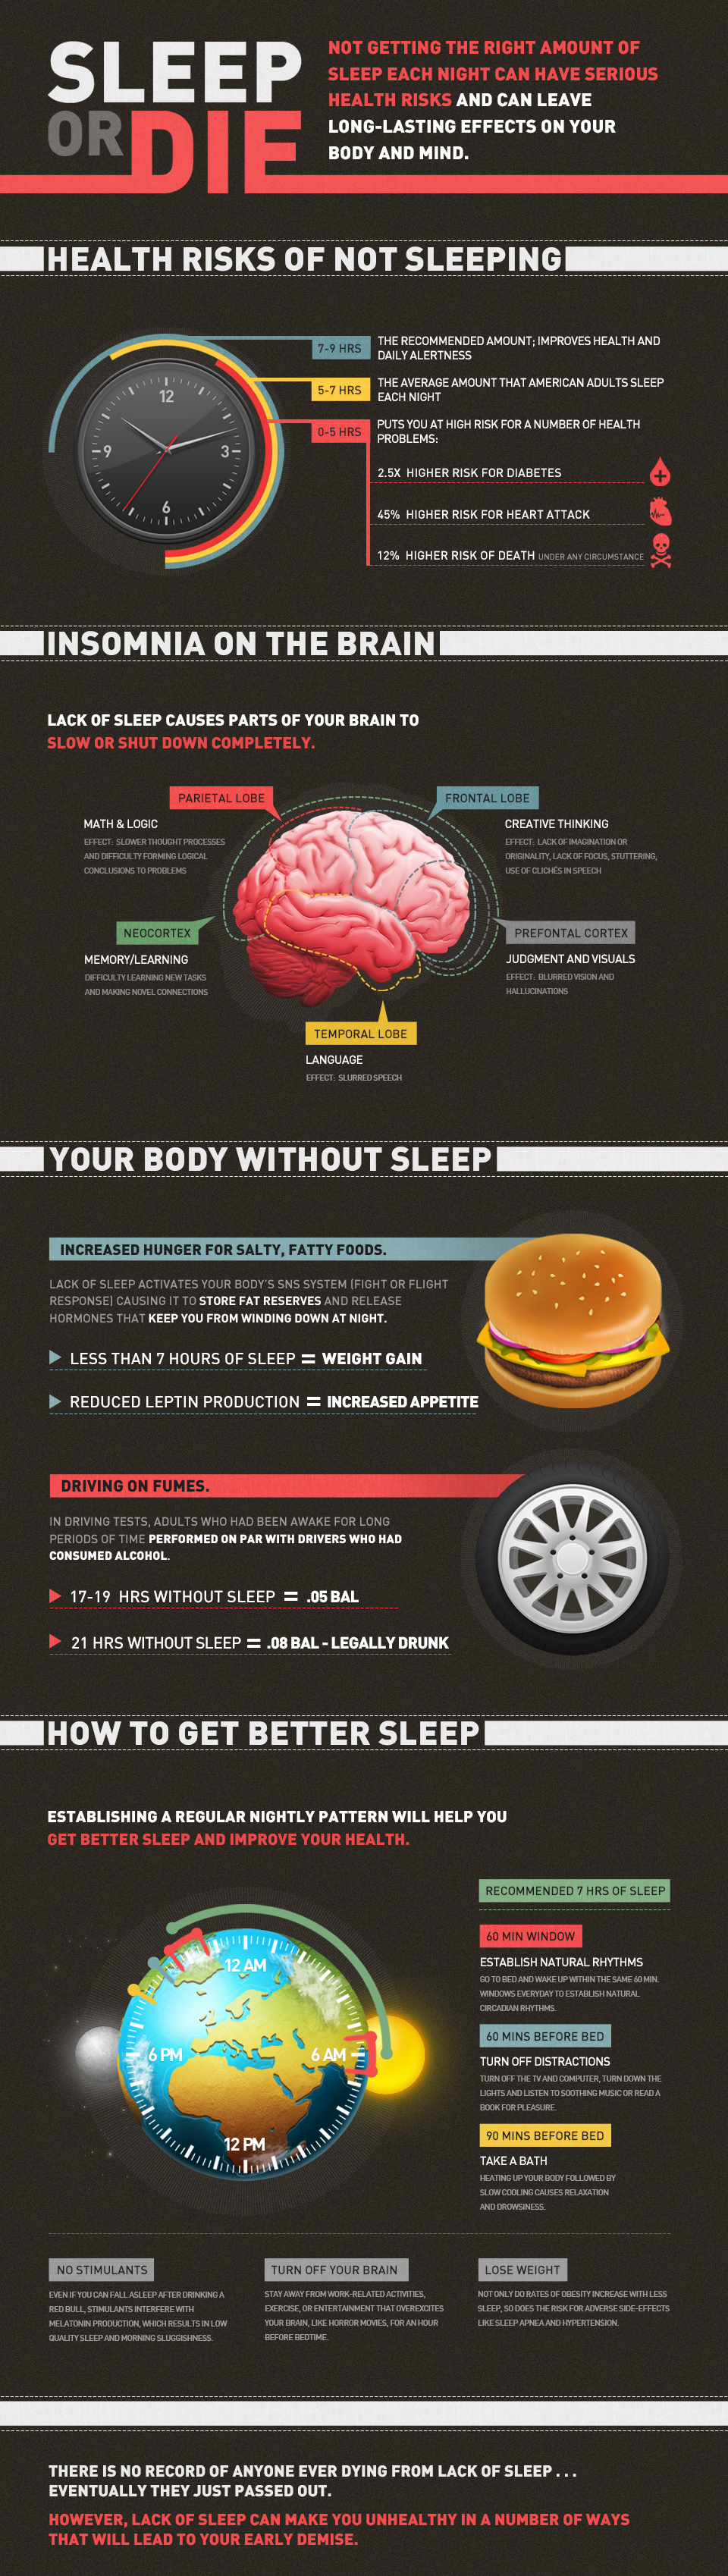 Negative Effects that Lack of Sleep Has on Your Body